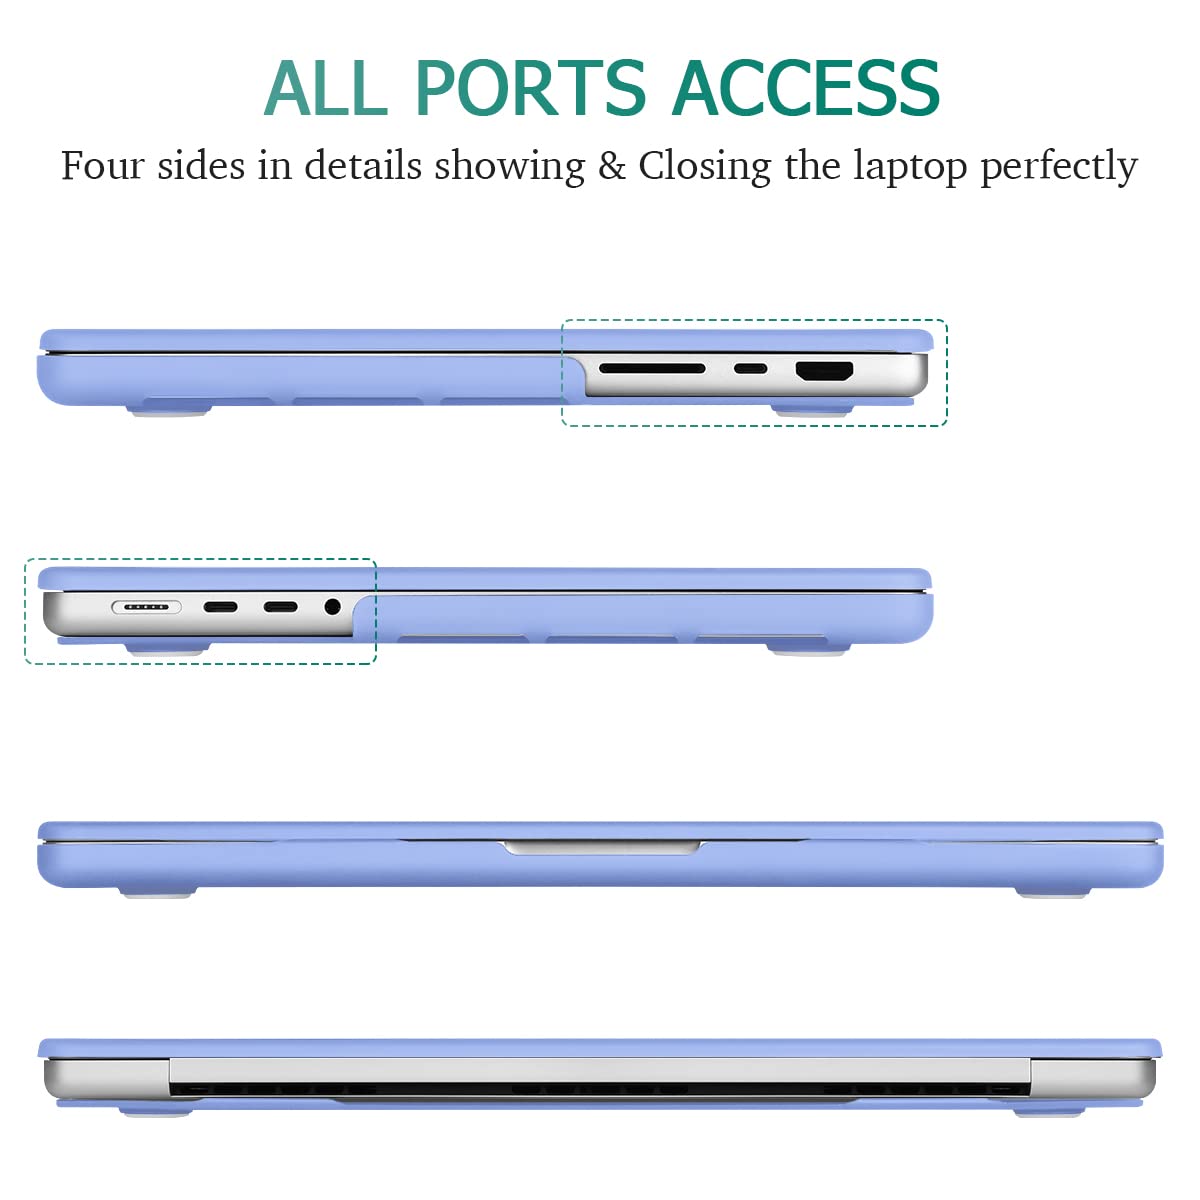 Suitable for  MacBook Pro 14 Max Inch Case 2023 2022 2021 M2 A2779 M1 A2442 Hardshell Case Keyboard Cover